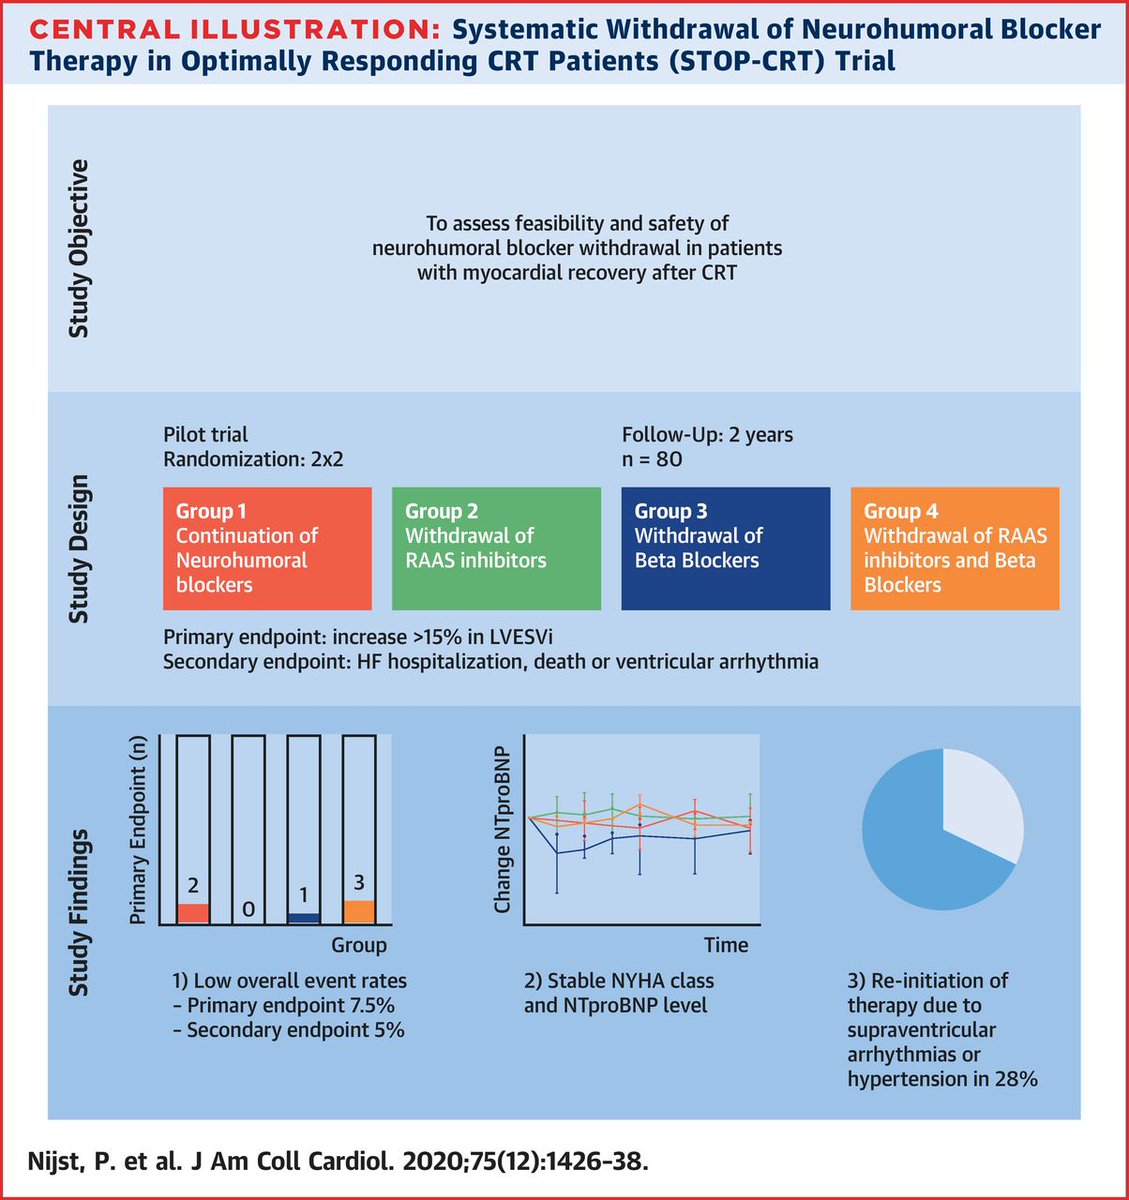 Is stopping the administration of neurohumoral blockers in #heartfailure patients safe following #epCRT? Dr. @petra_nijst et al. report on the #HFrEF-related outcomes in #JACC. bit.ly/2Ug5nhV